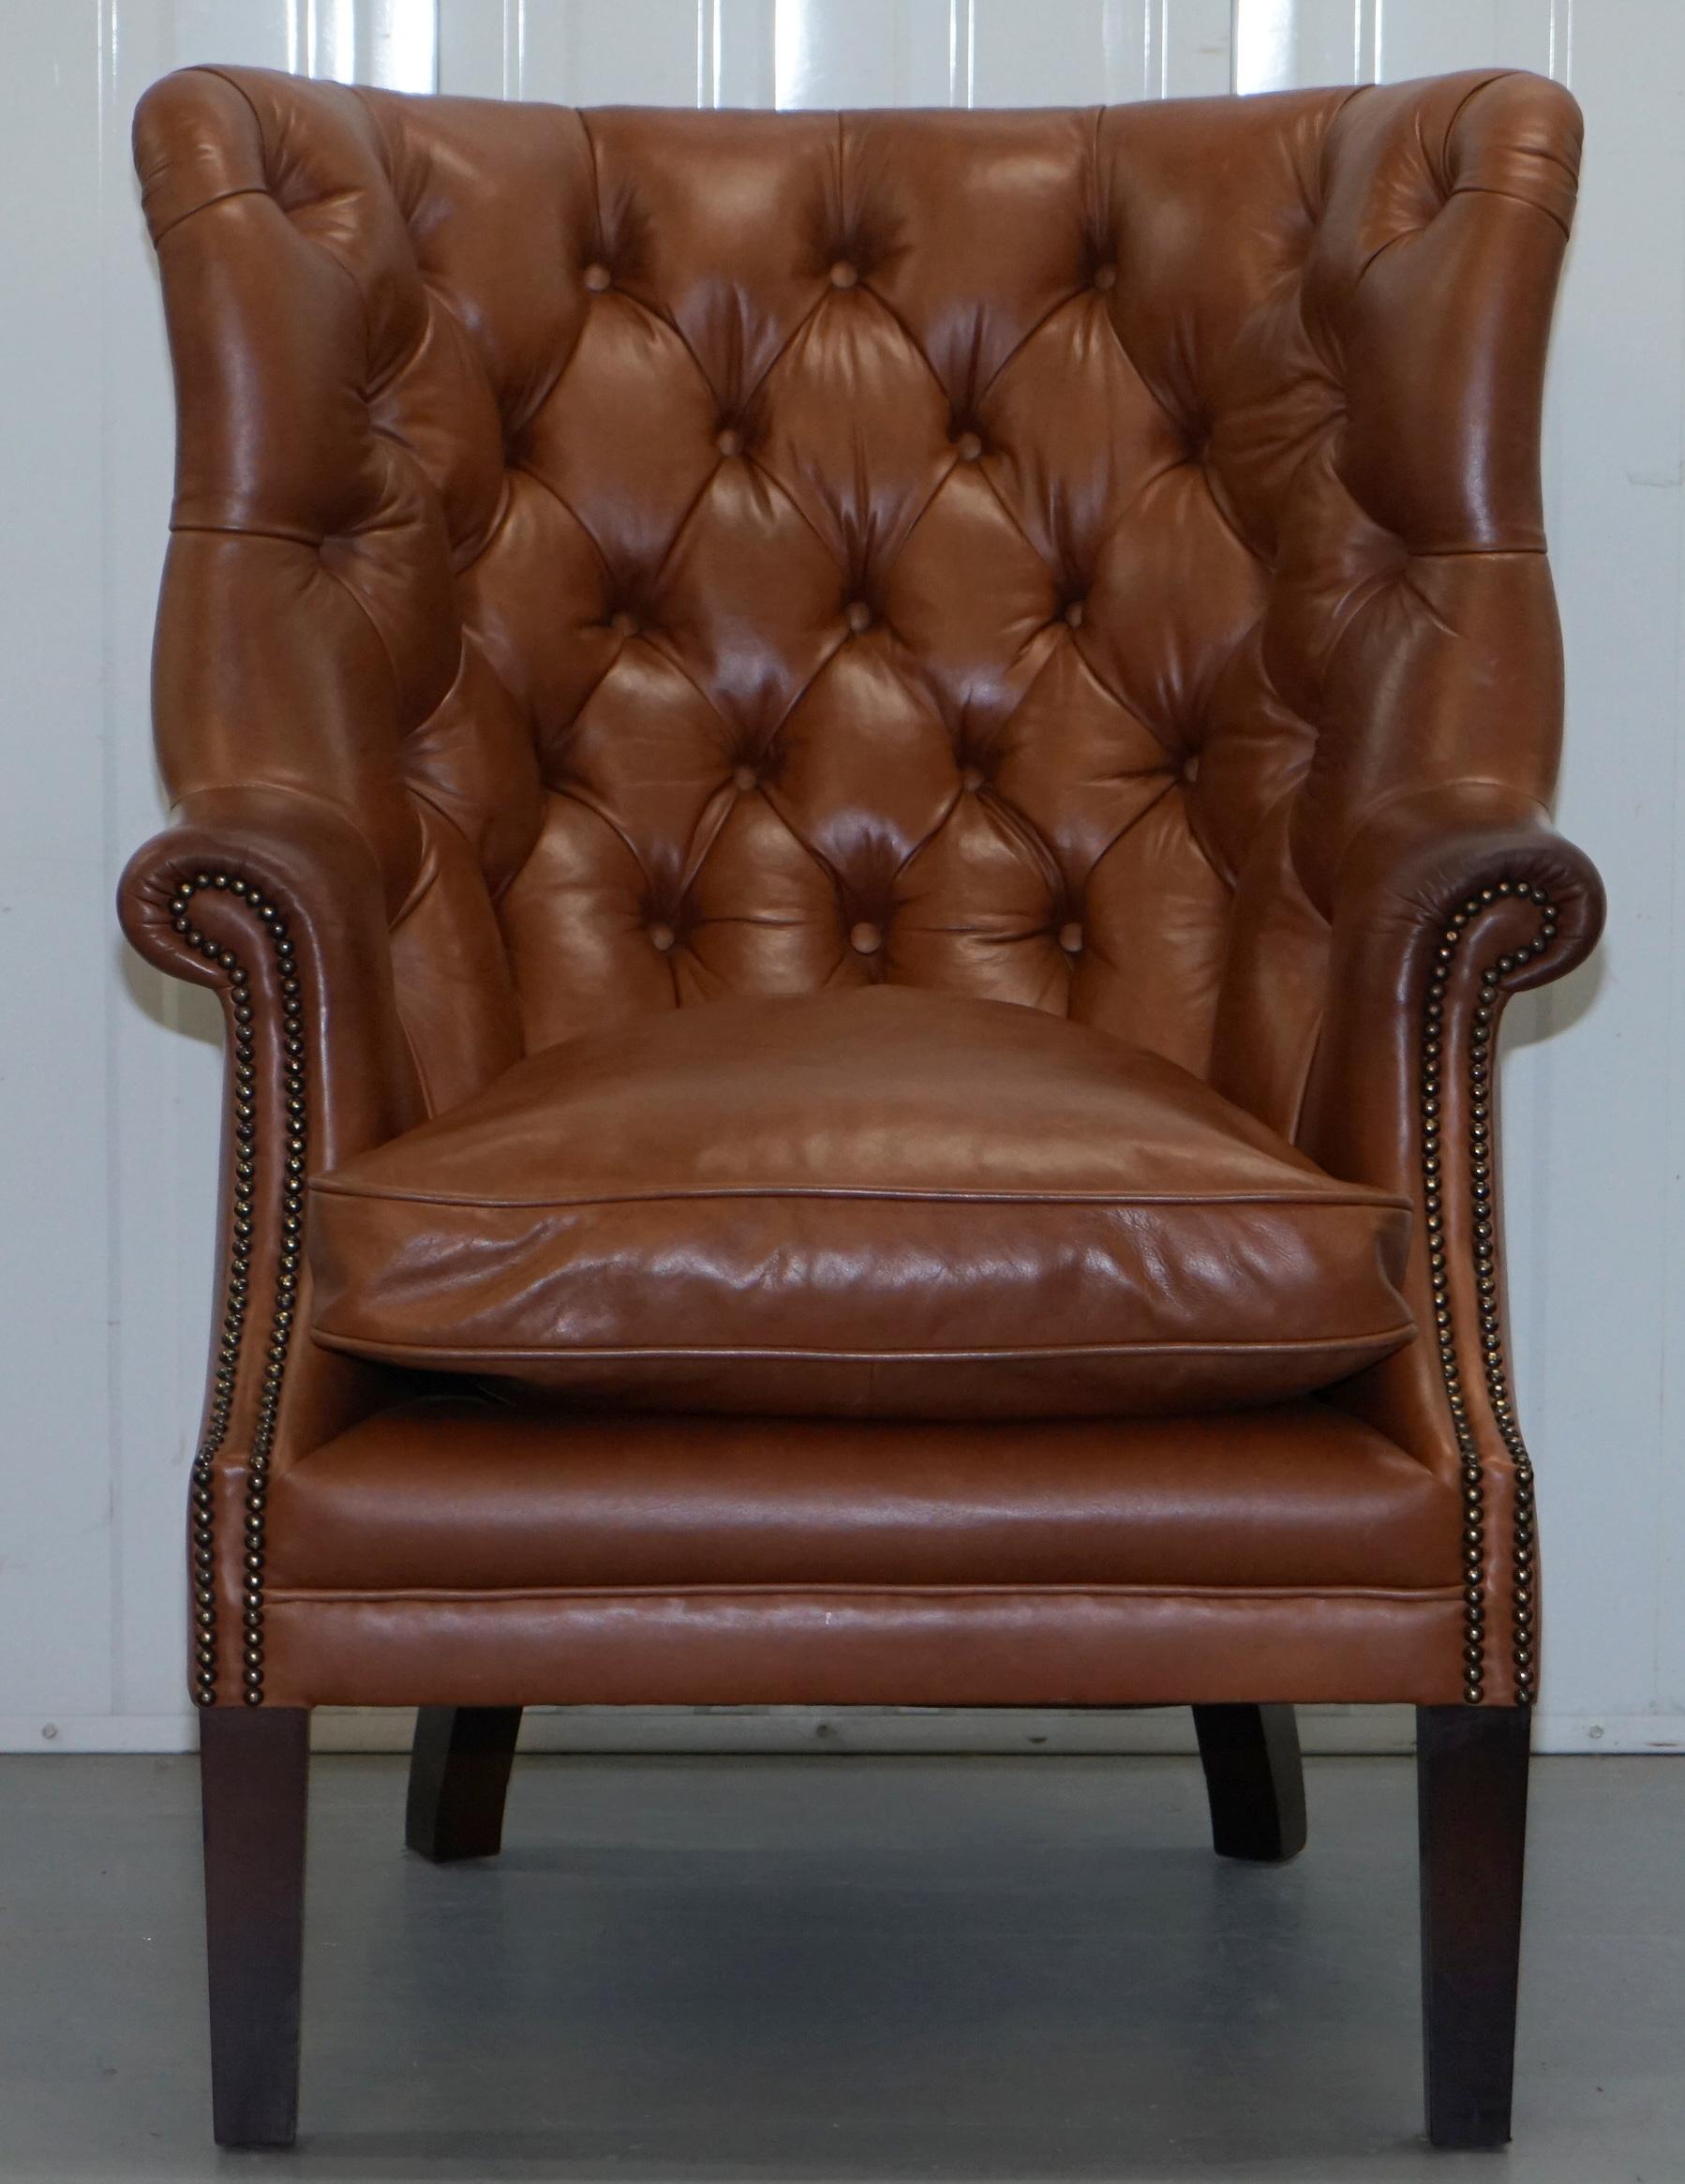 We are delighted to offer for auction this lovely Tetrad Bradley Wingback Porters Chesterfield buttoned brown leather armchair RRP £1860

Tetrad Upholstery Bradley high back wing chair. This classic superbly comfortable wing chair with an extra